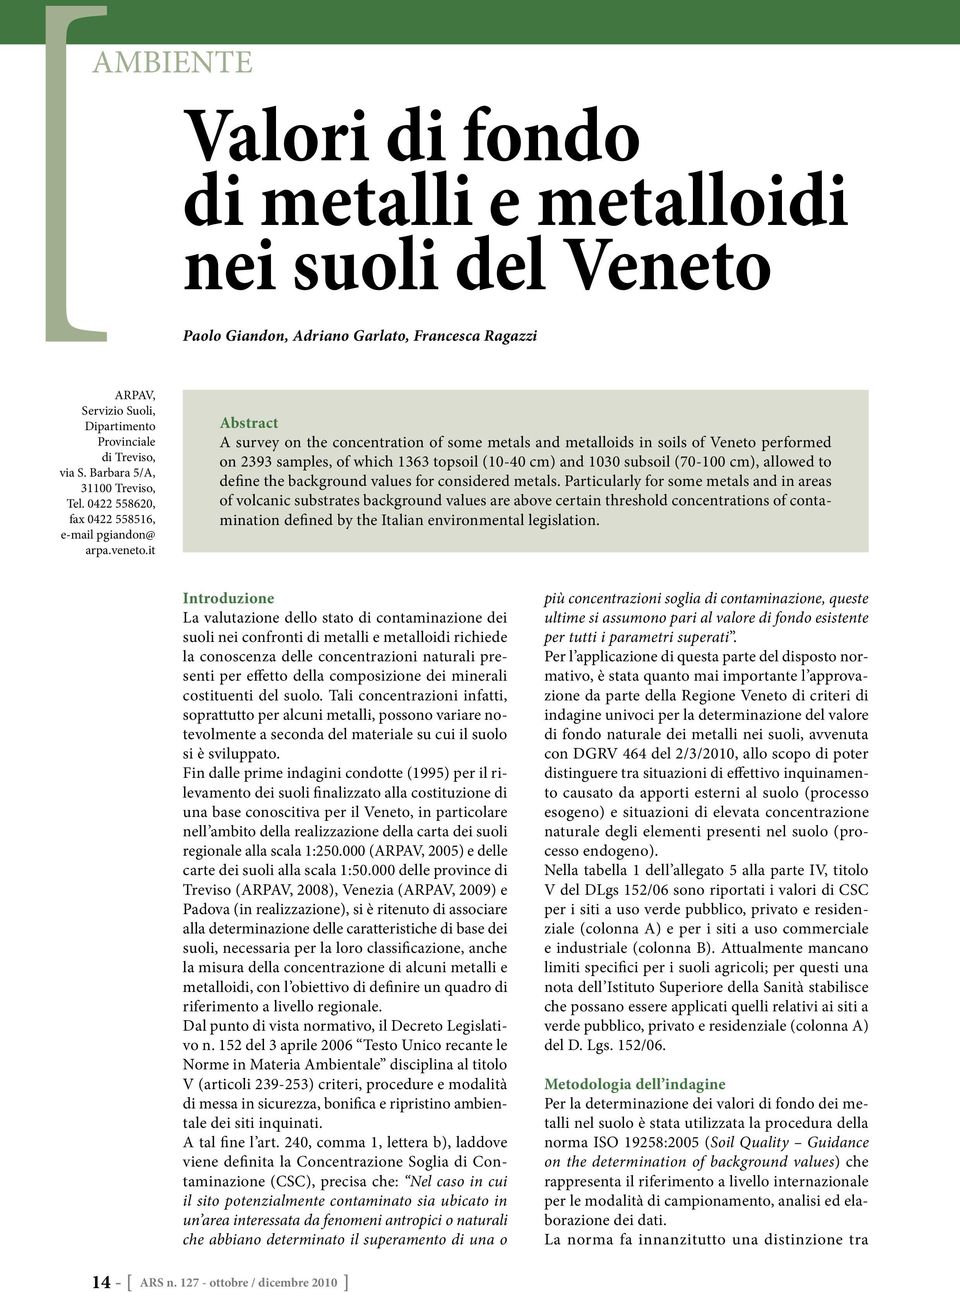 it Abstract A survey on the concentration of some metals and metalloids in soils of Veneto performed on 2393 samples, of which 1363 topsoil (10-40 cm) and 1030 subsoil (70-100 cm), allowed to define